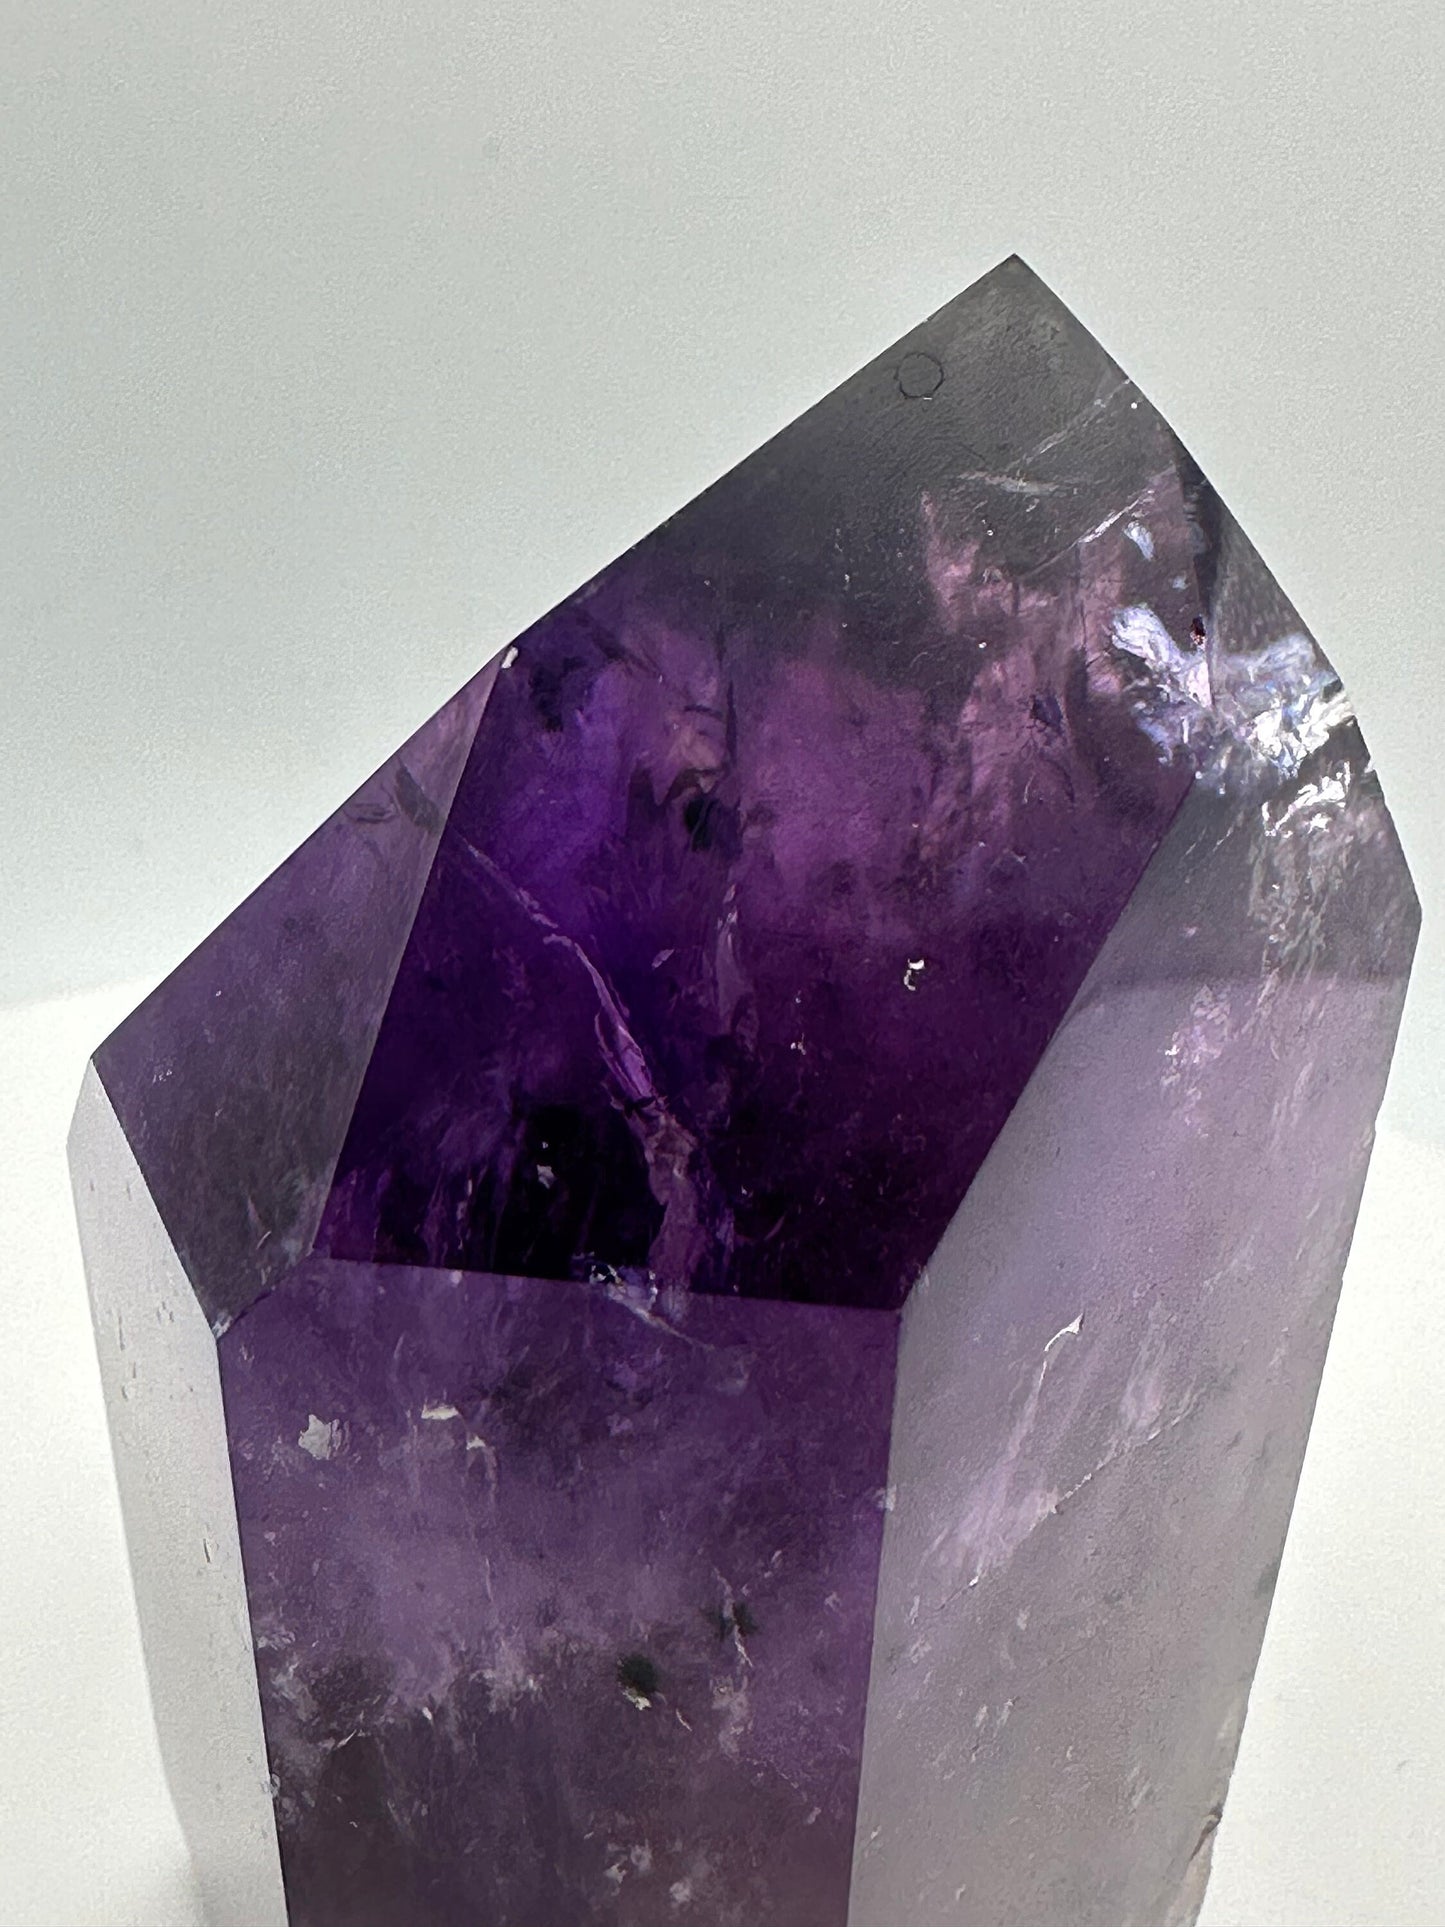 Chunky AAA Phantom Amethyst Chunky Tower With Hollandite Inclusions - From Brazil